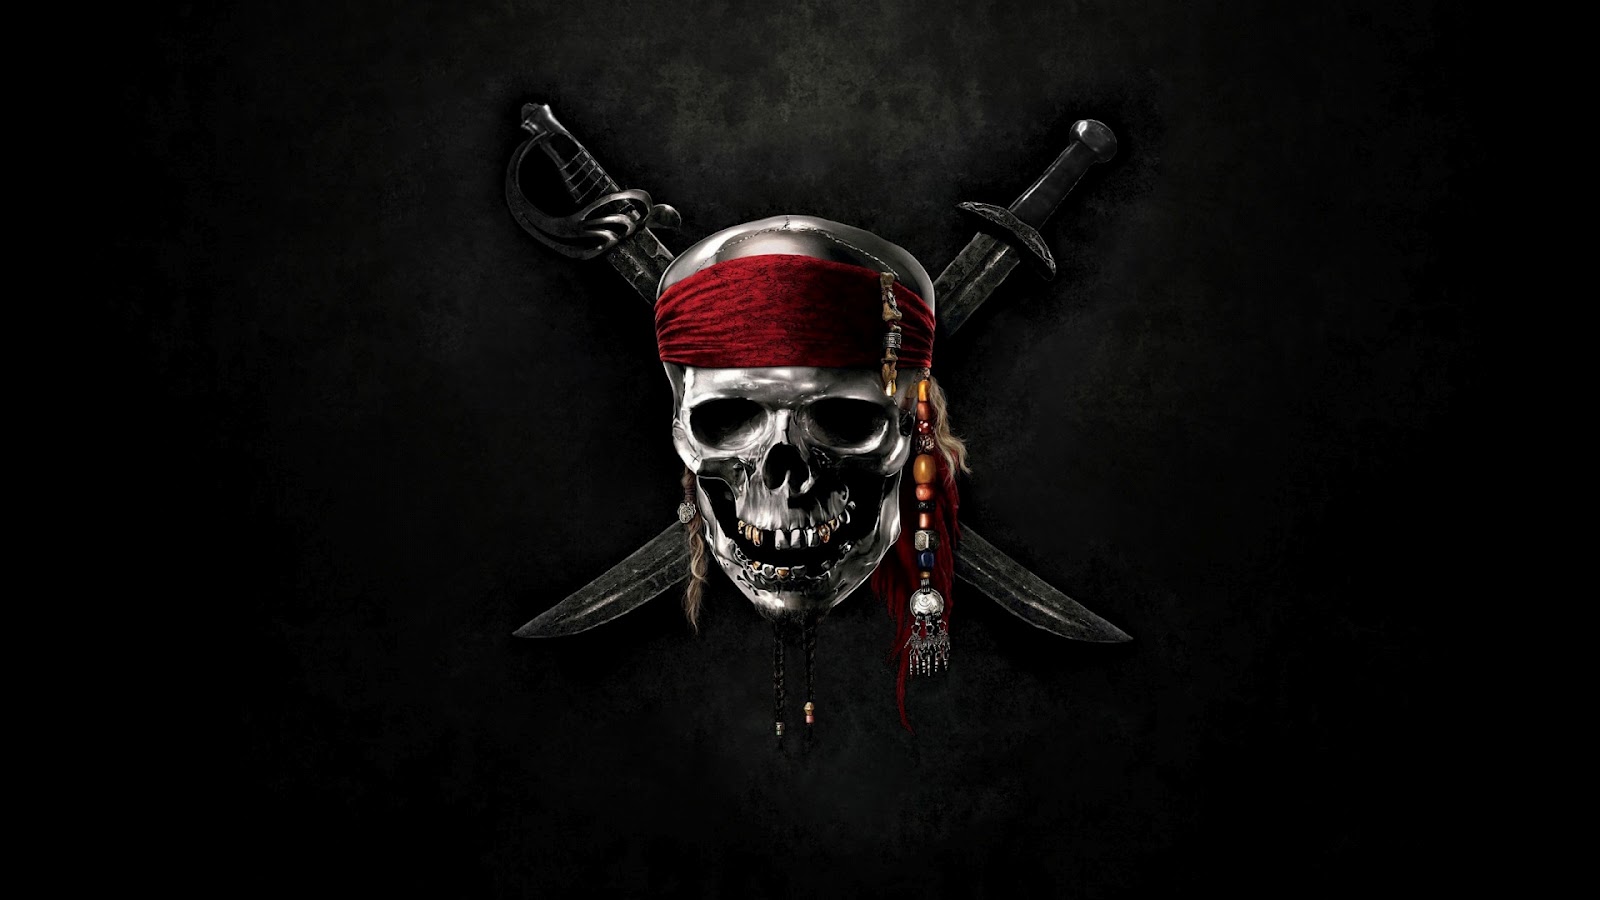 Your Wallpaper Pirate